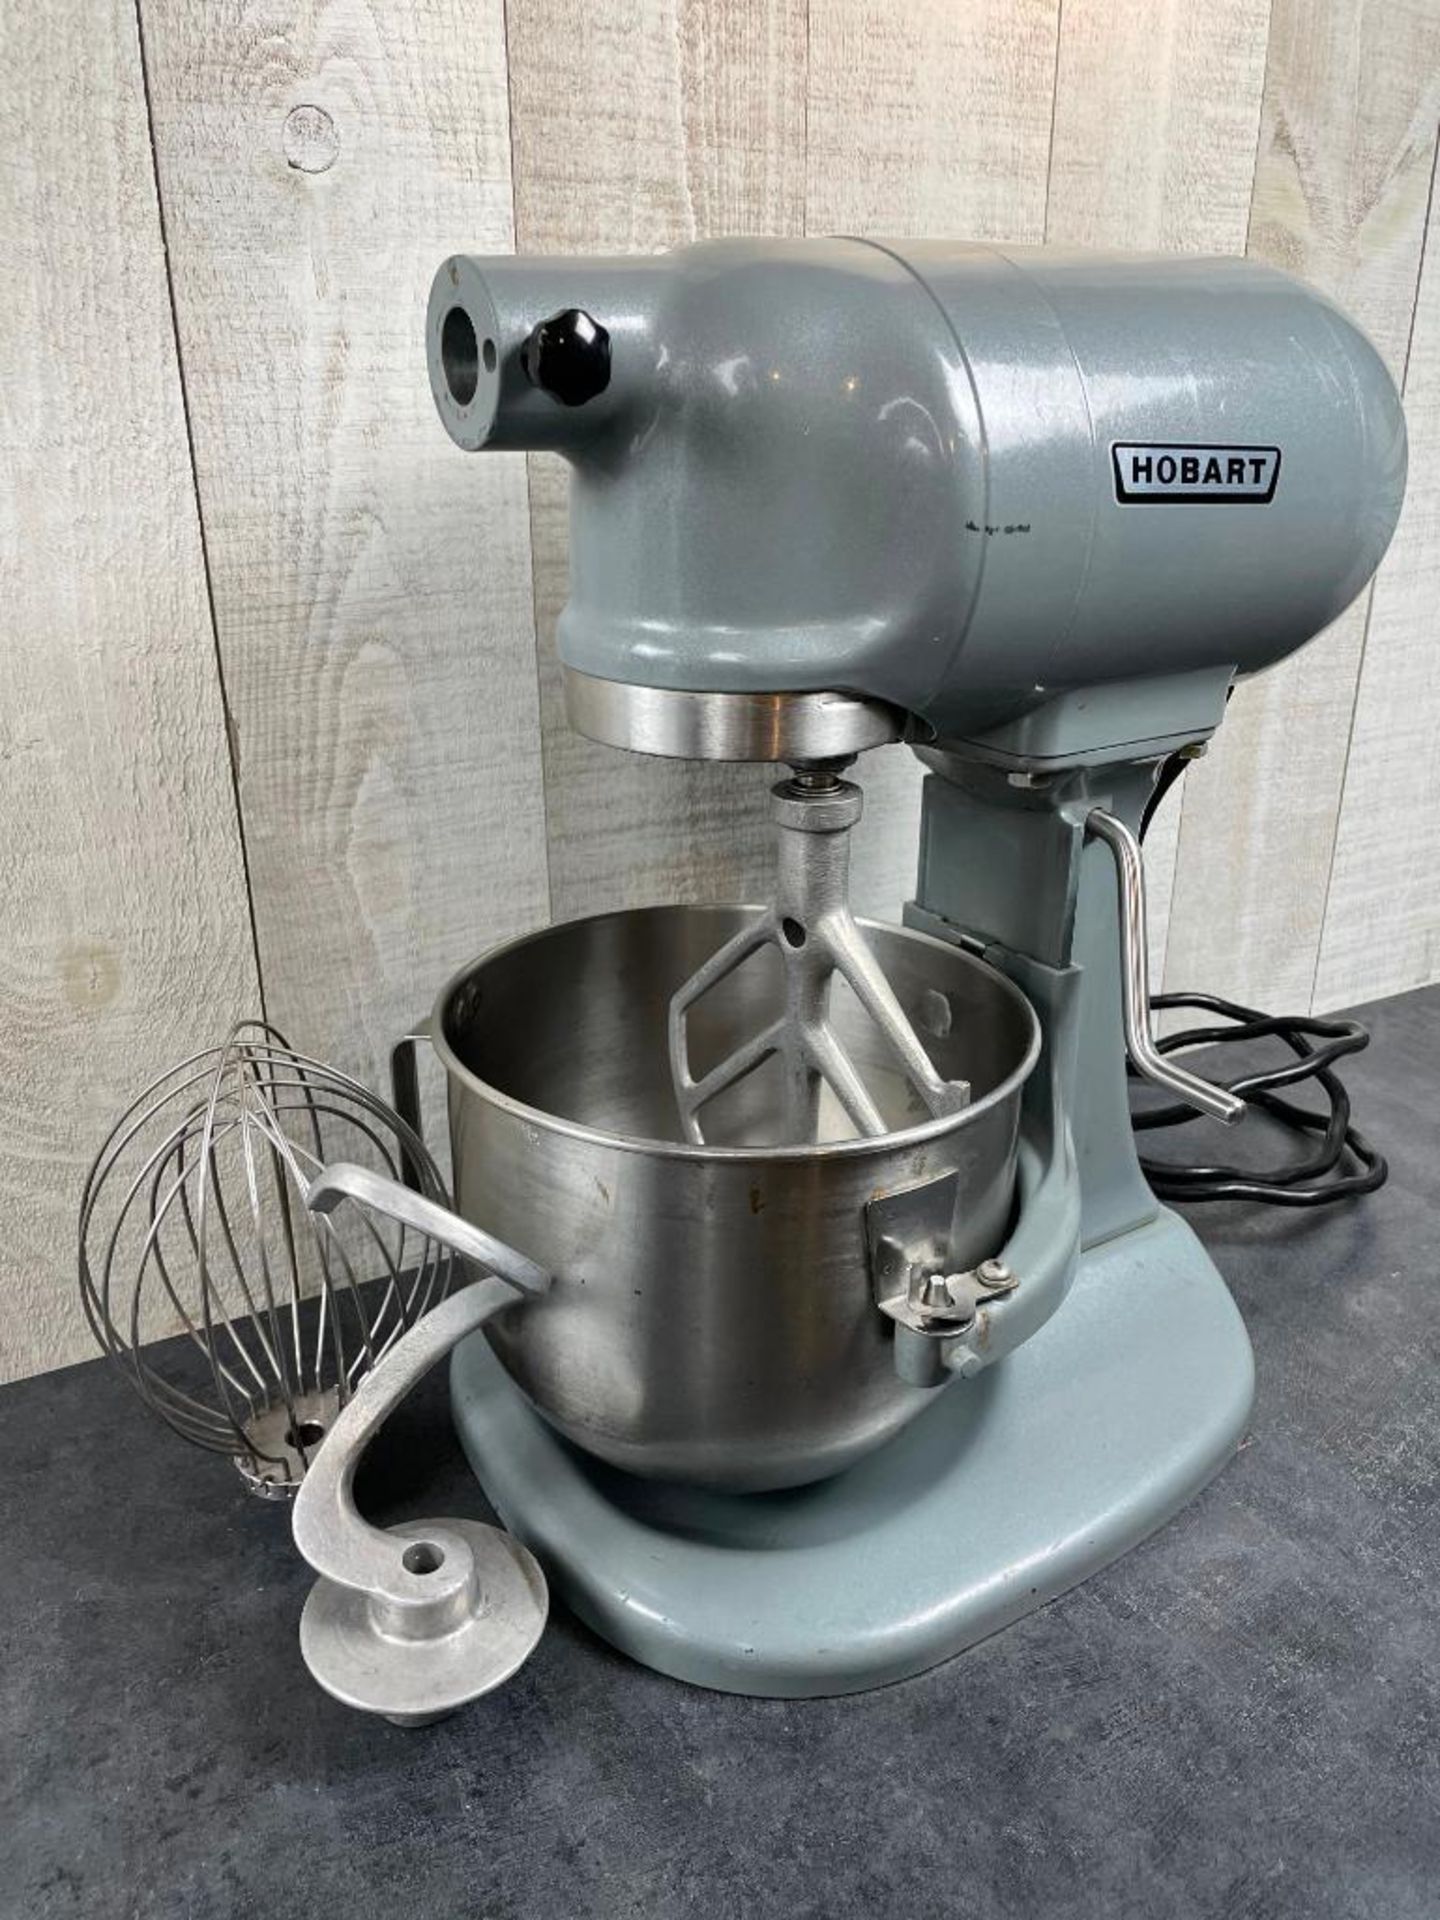 HOBART N50 5QT MIXER WITH HOOK, WHIP, PADDLE - Image 2 of 9